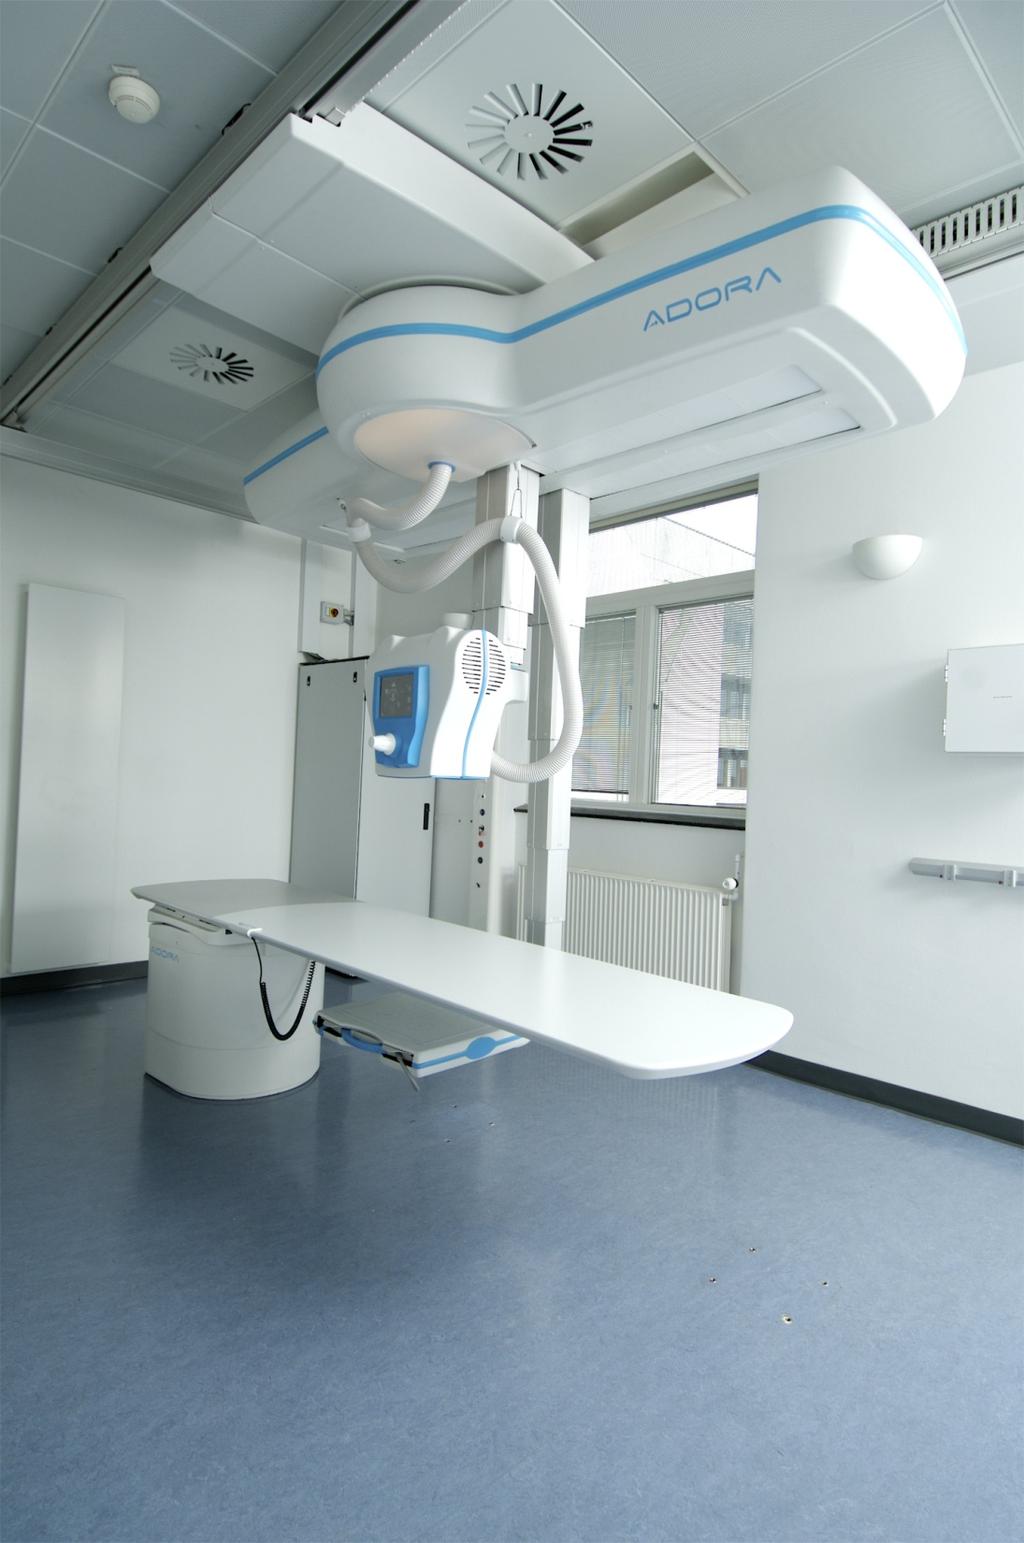 Positioner & patient table Ceiling suspended tube & detector Unit rotates around its center suspension axis Tracking mode or Individual positioning SID Range 30 200 cm Ceiling unit rotation +/- 180 o